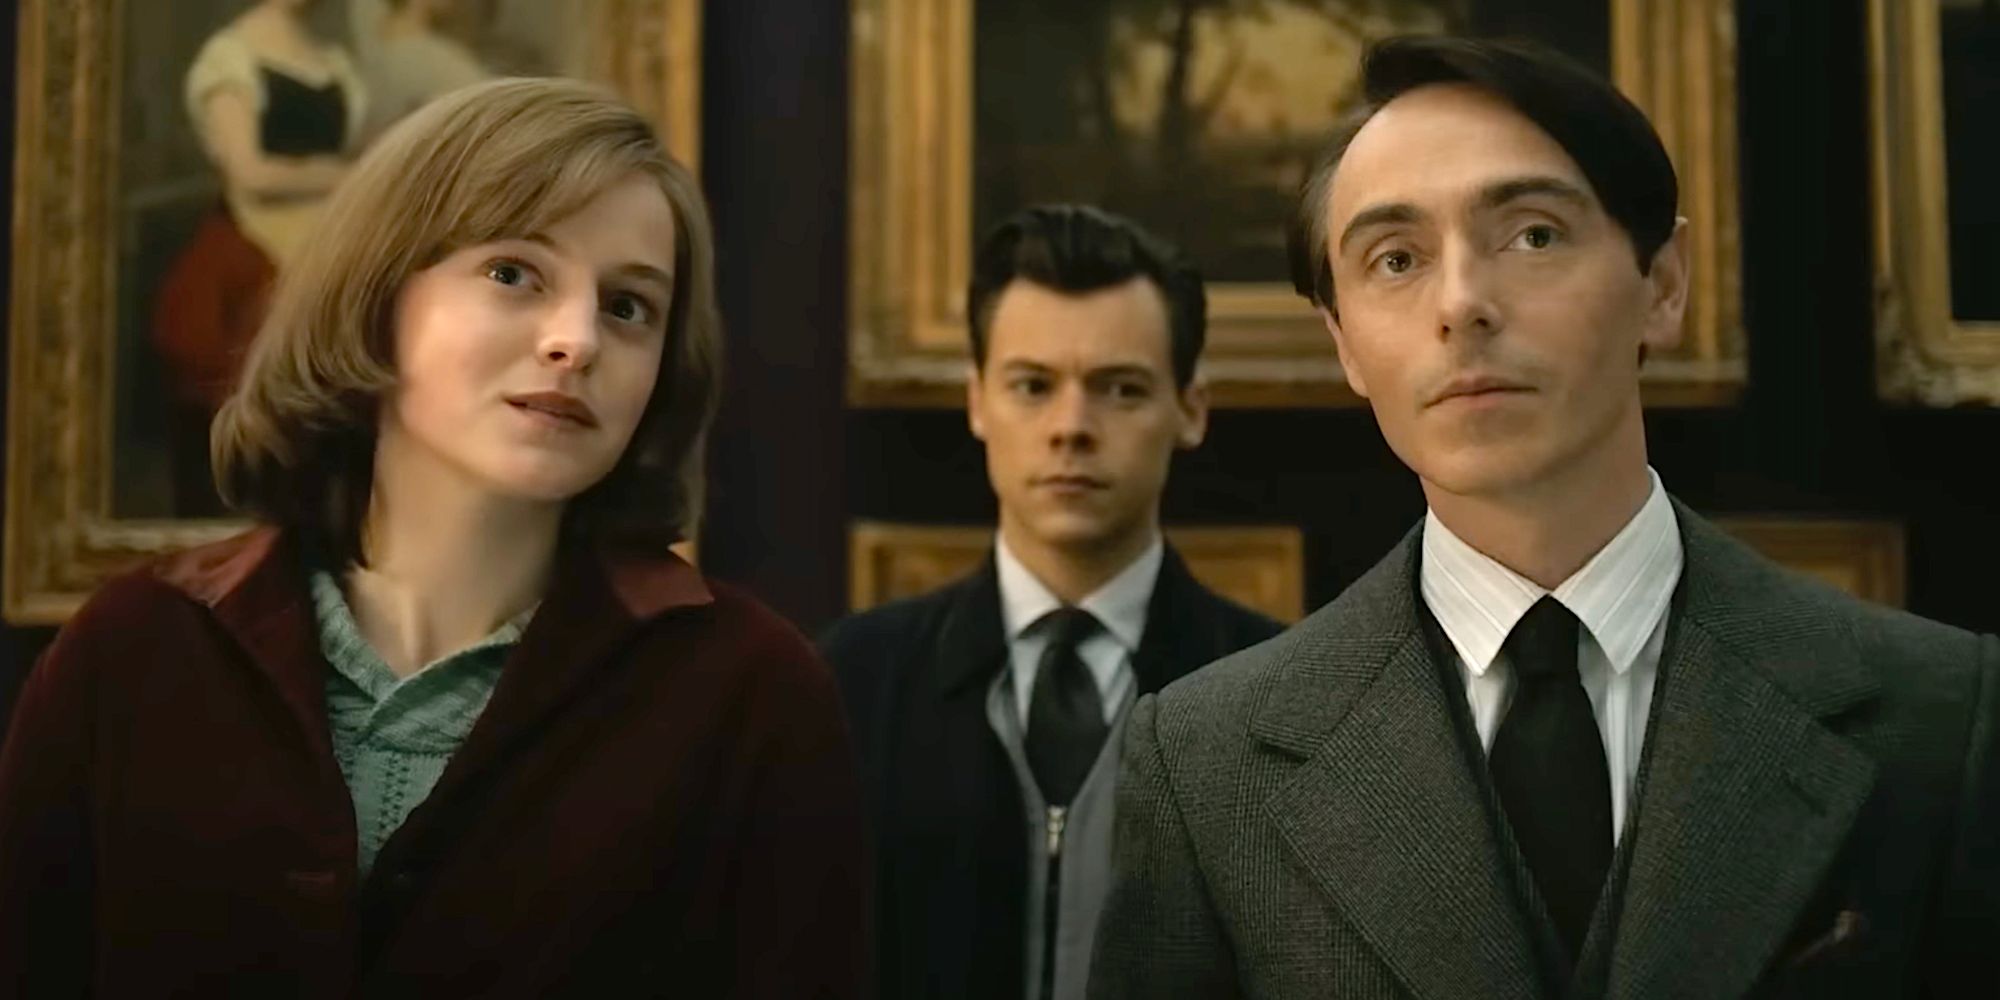 Emma Corrin and David Dawson in My Policeman with Harry Styles in the background